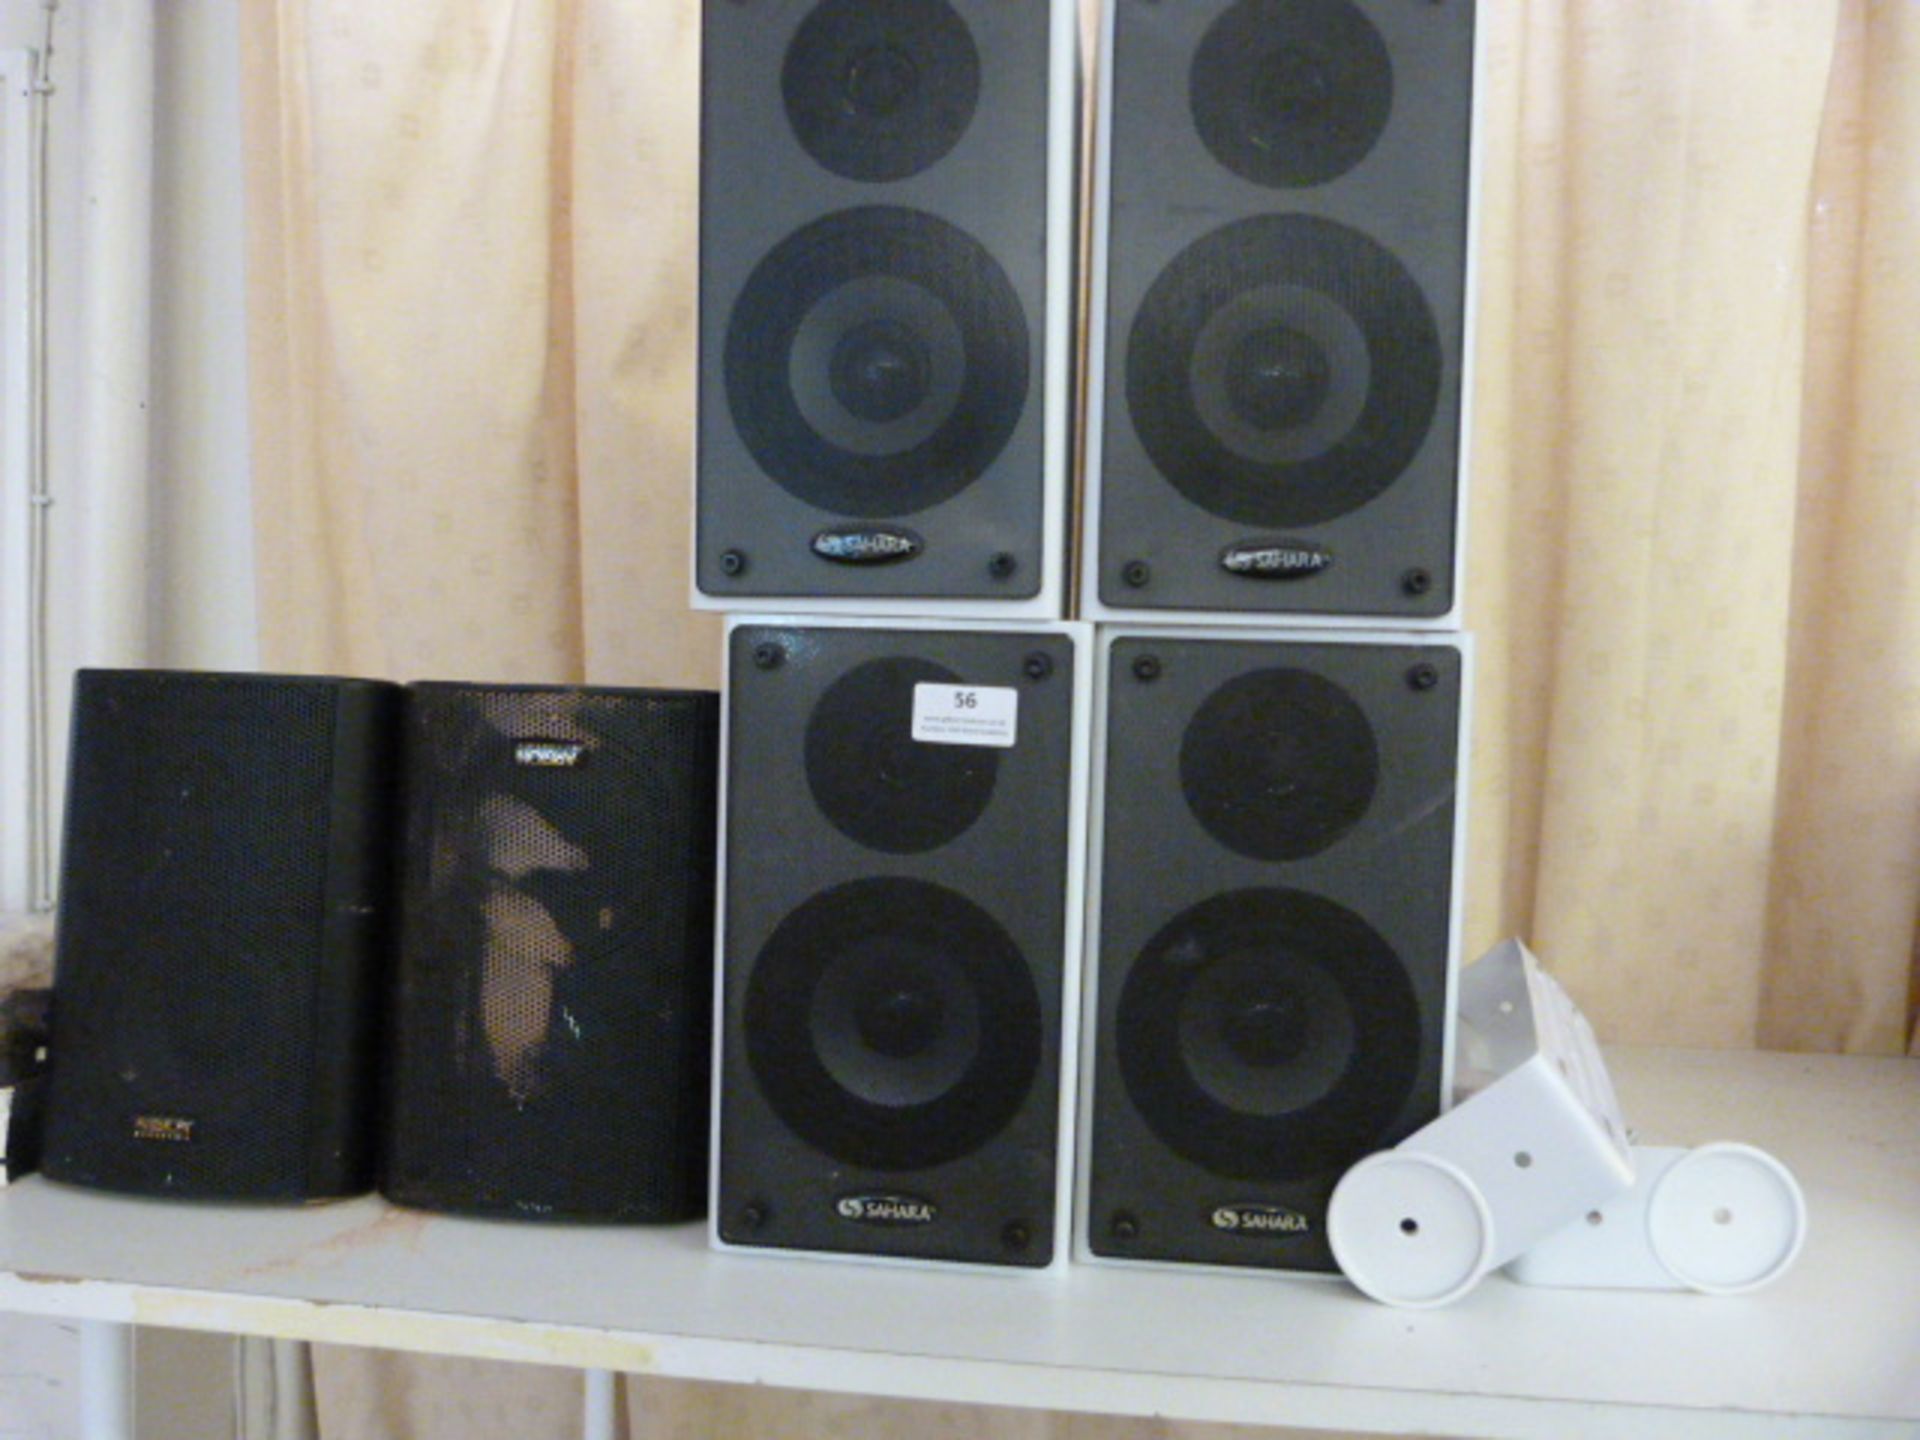 *Three Pairs of Speakers with Two Sets of Mounting Brackets